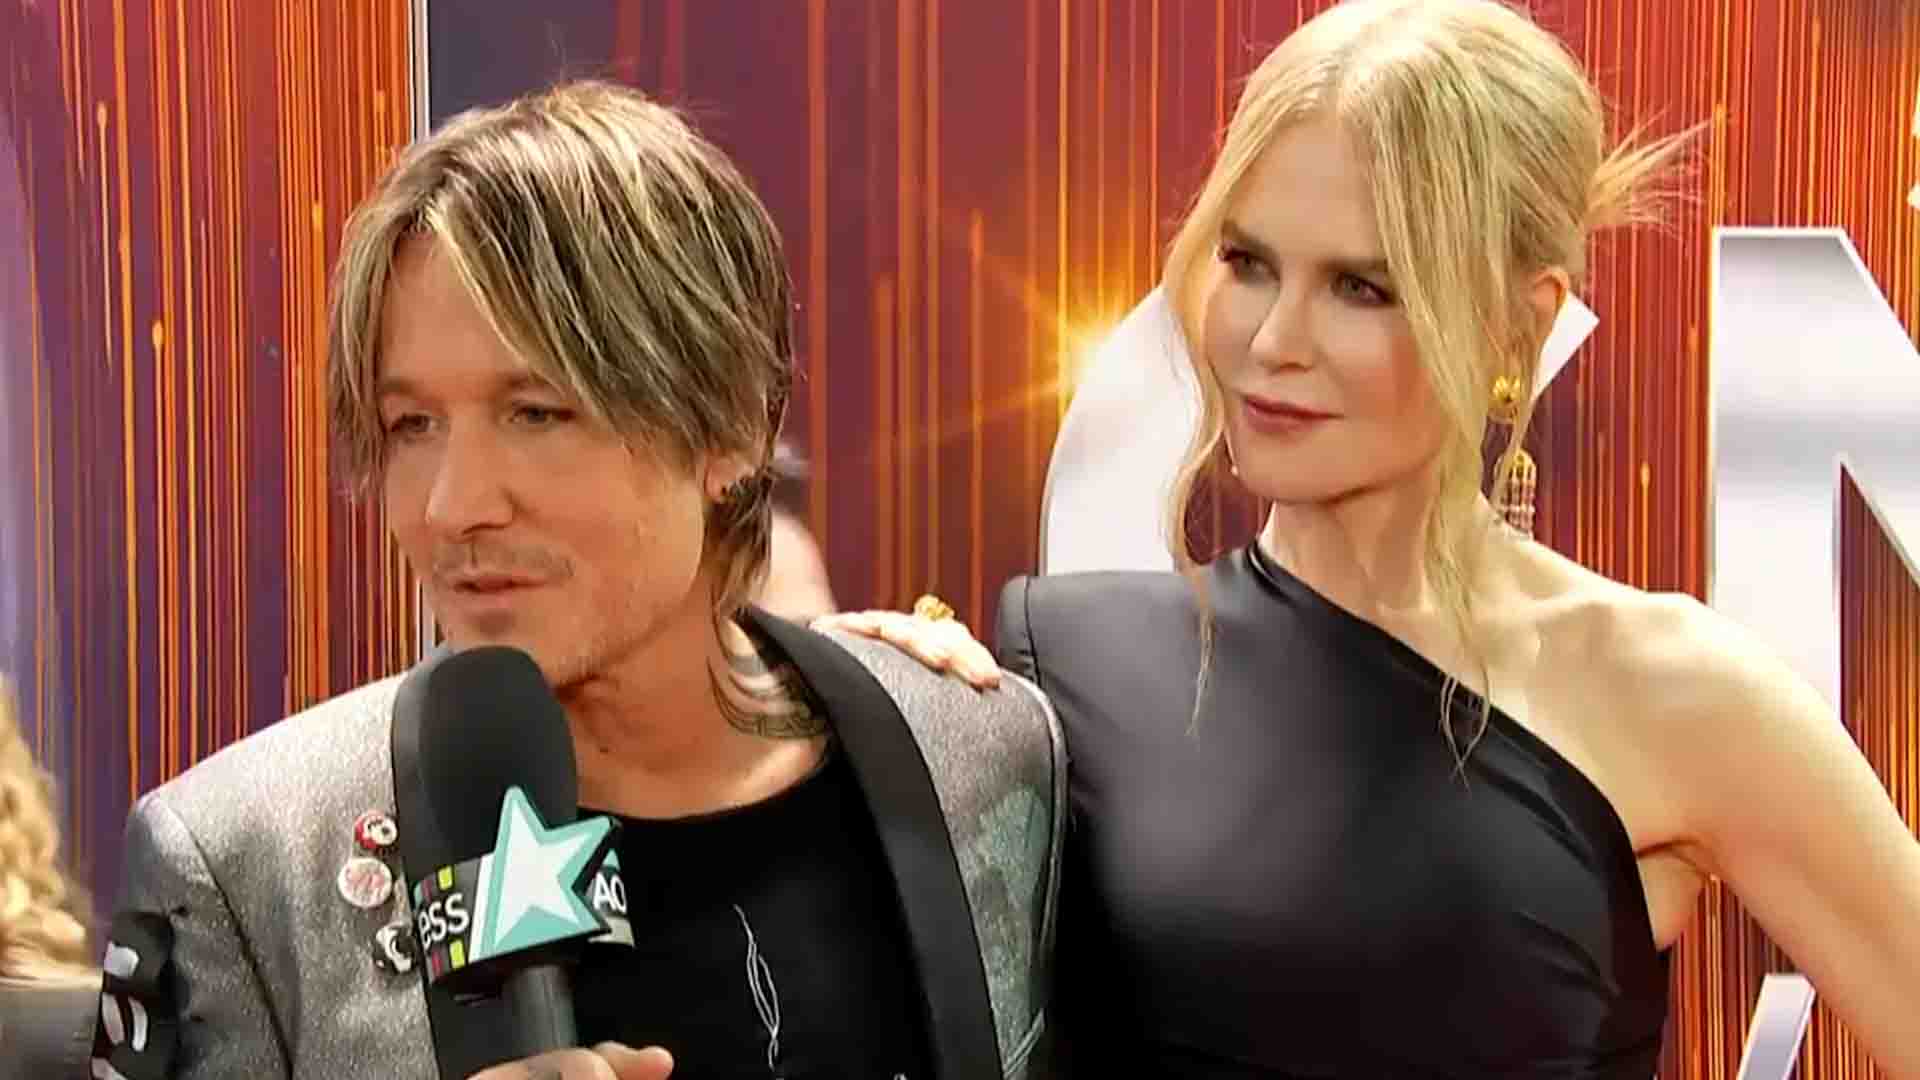 Nicole Kidman and Keith Urban Went For a Polished Champagne Look, and We'd  Like to Drink to That - Yahoo Sports